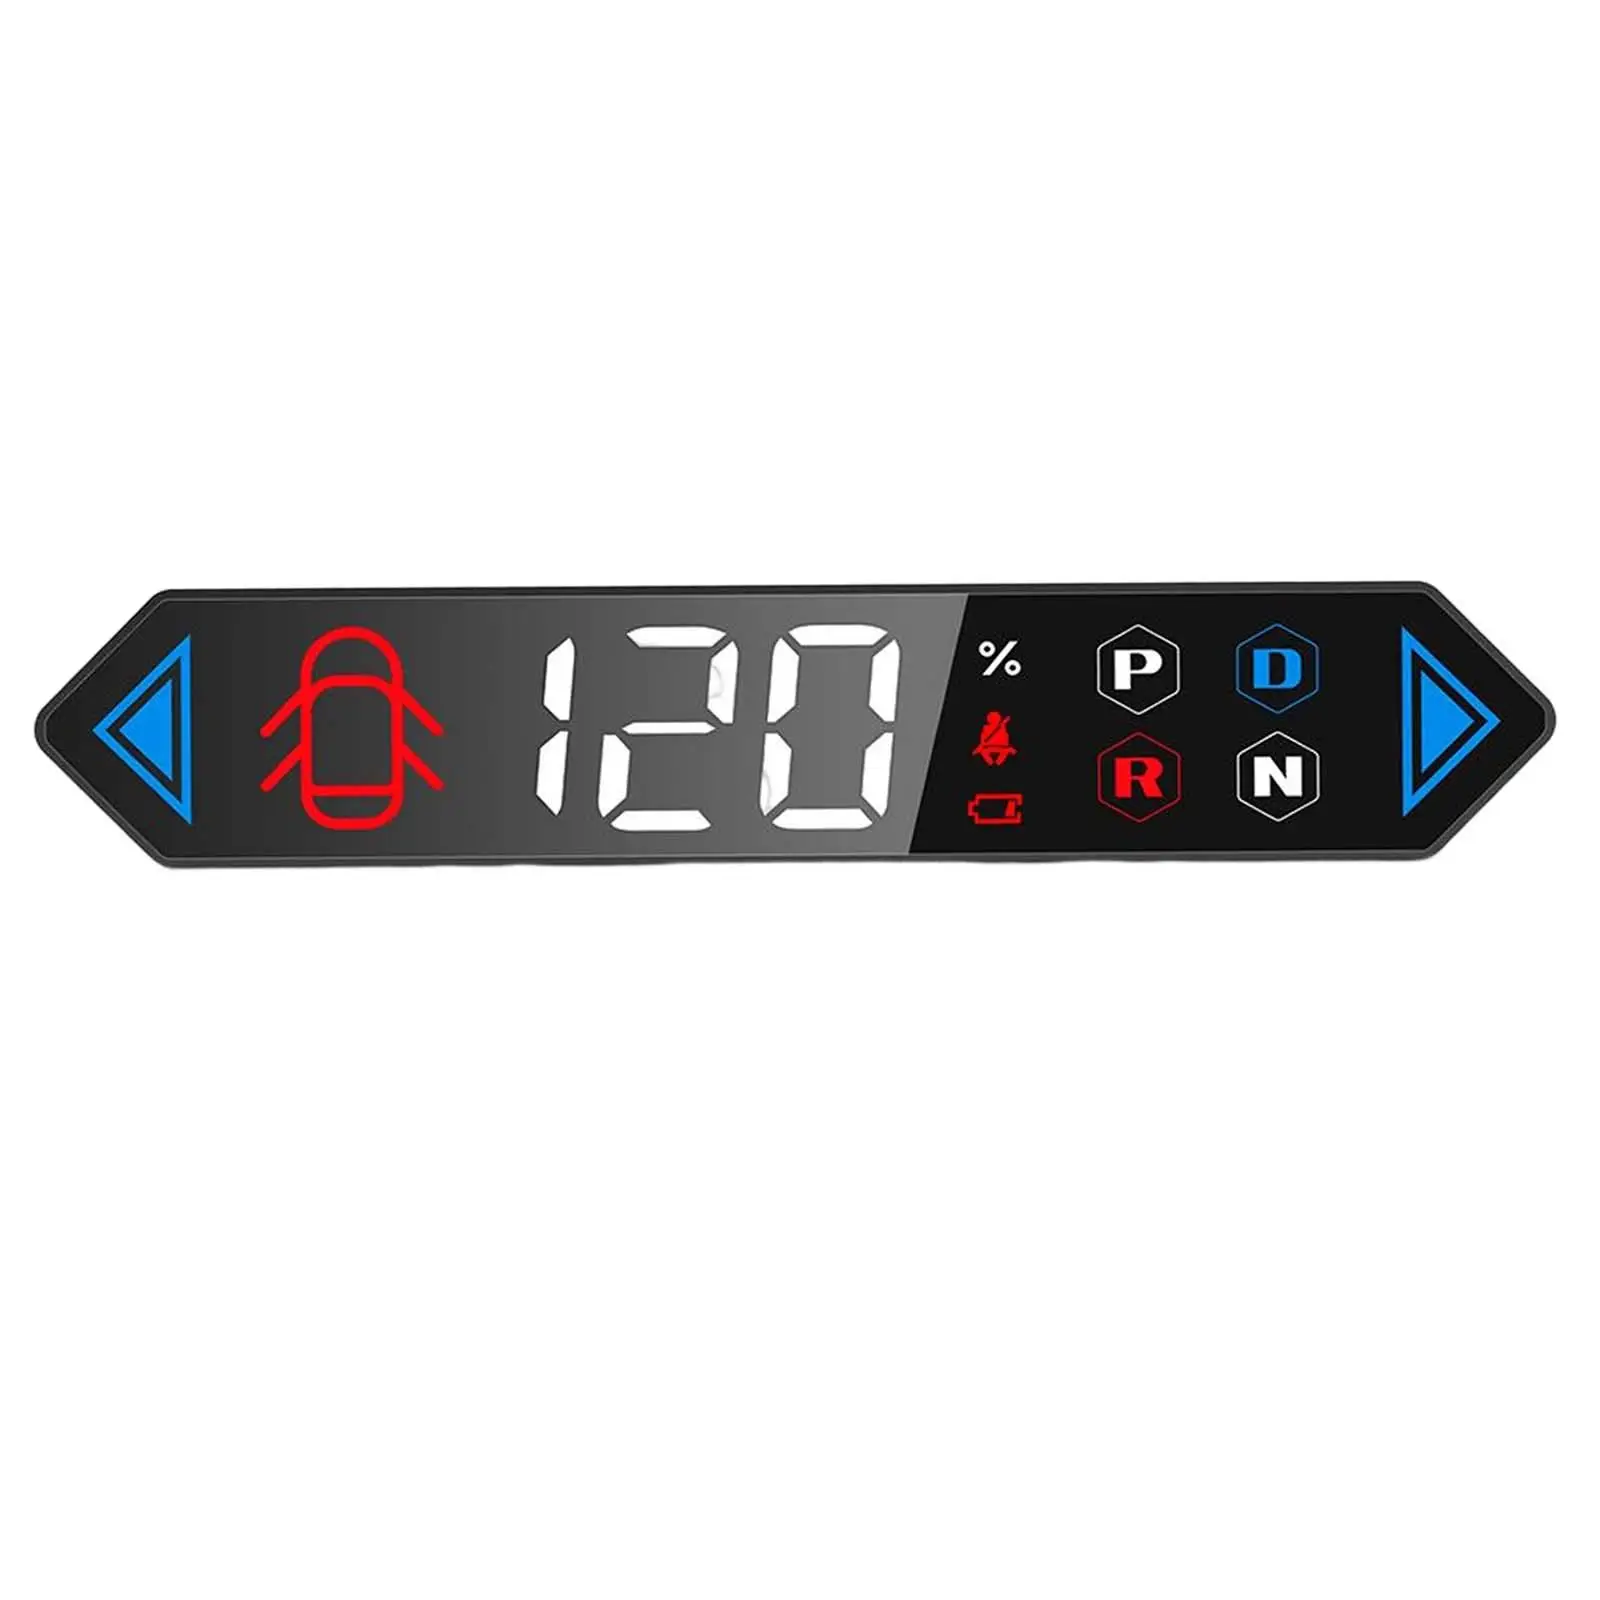 Embedded Design HUD Heads up Display Turn Signal for Tesla Model 3/Y Accessories